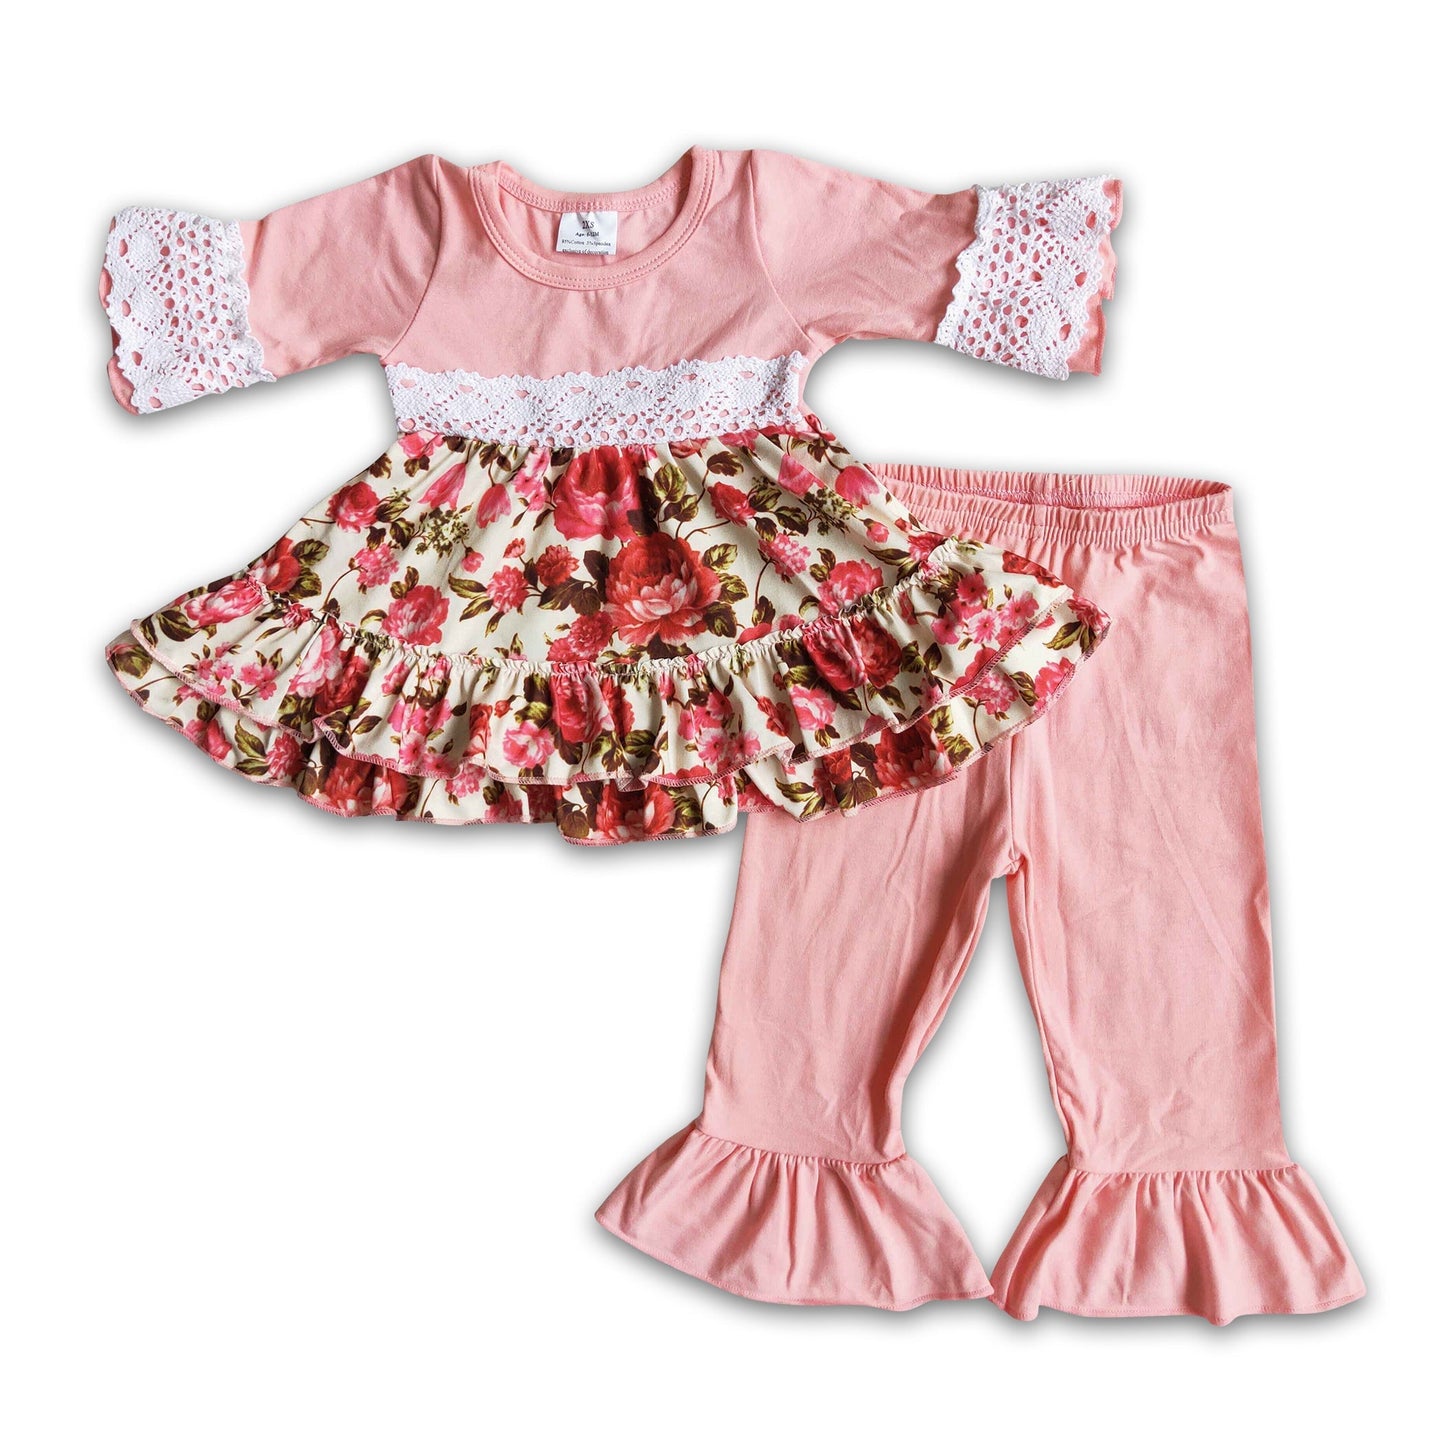 Floral tunic 3/4 sleeves girls clothing set